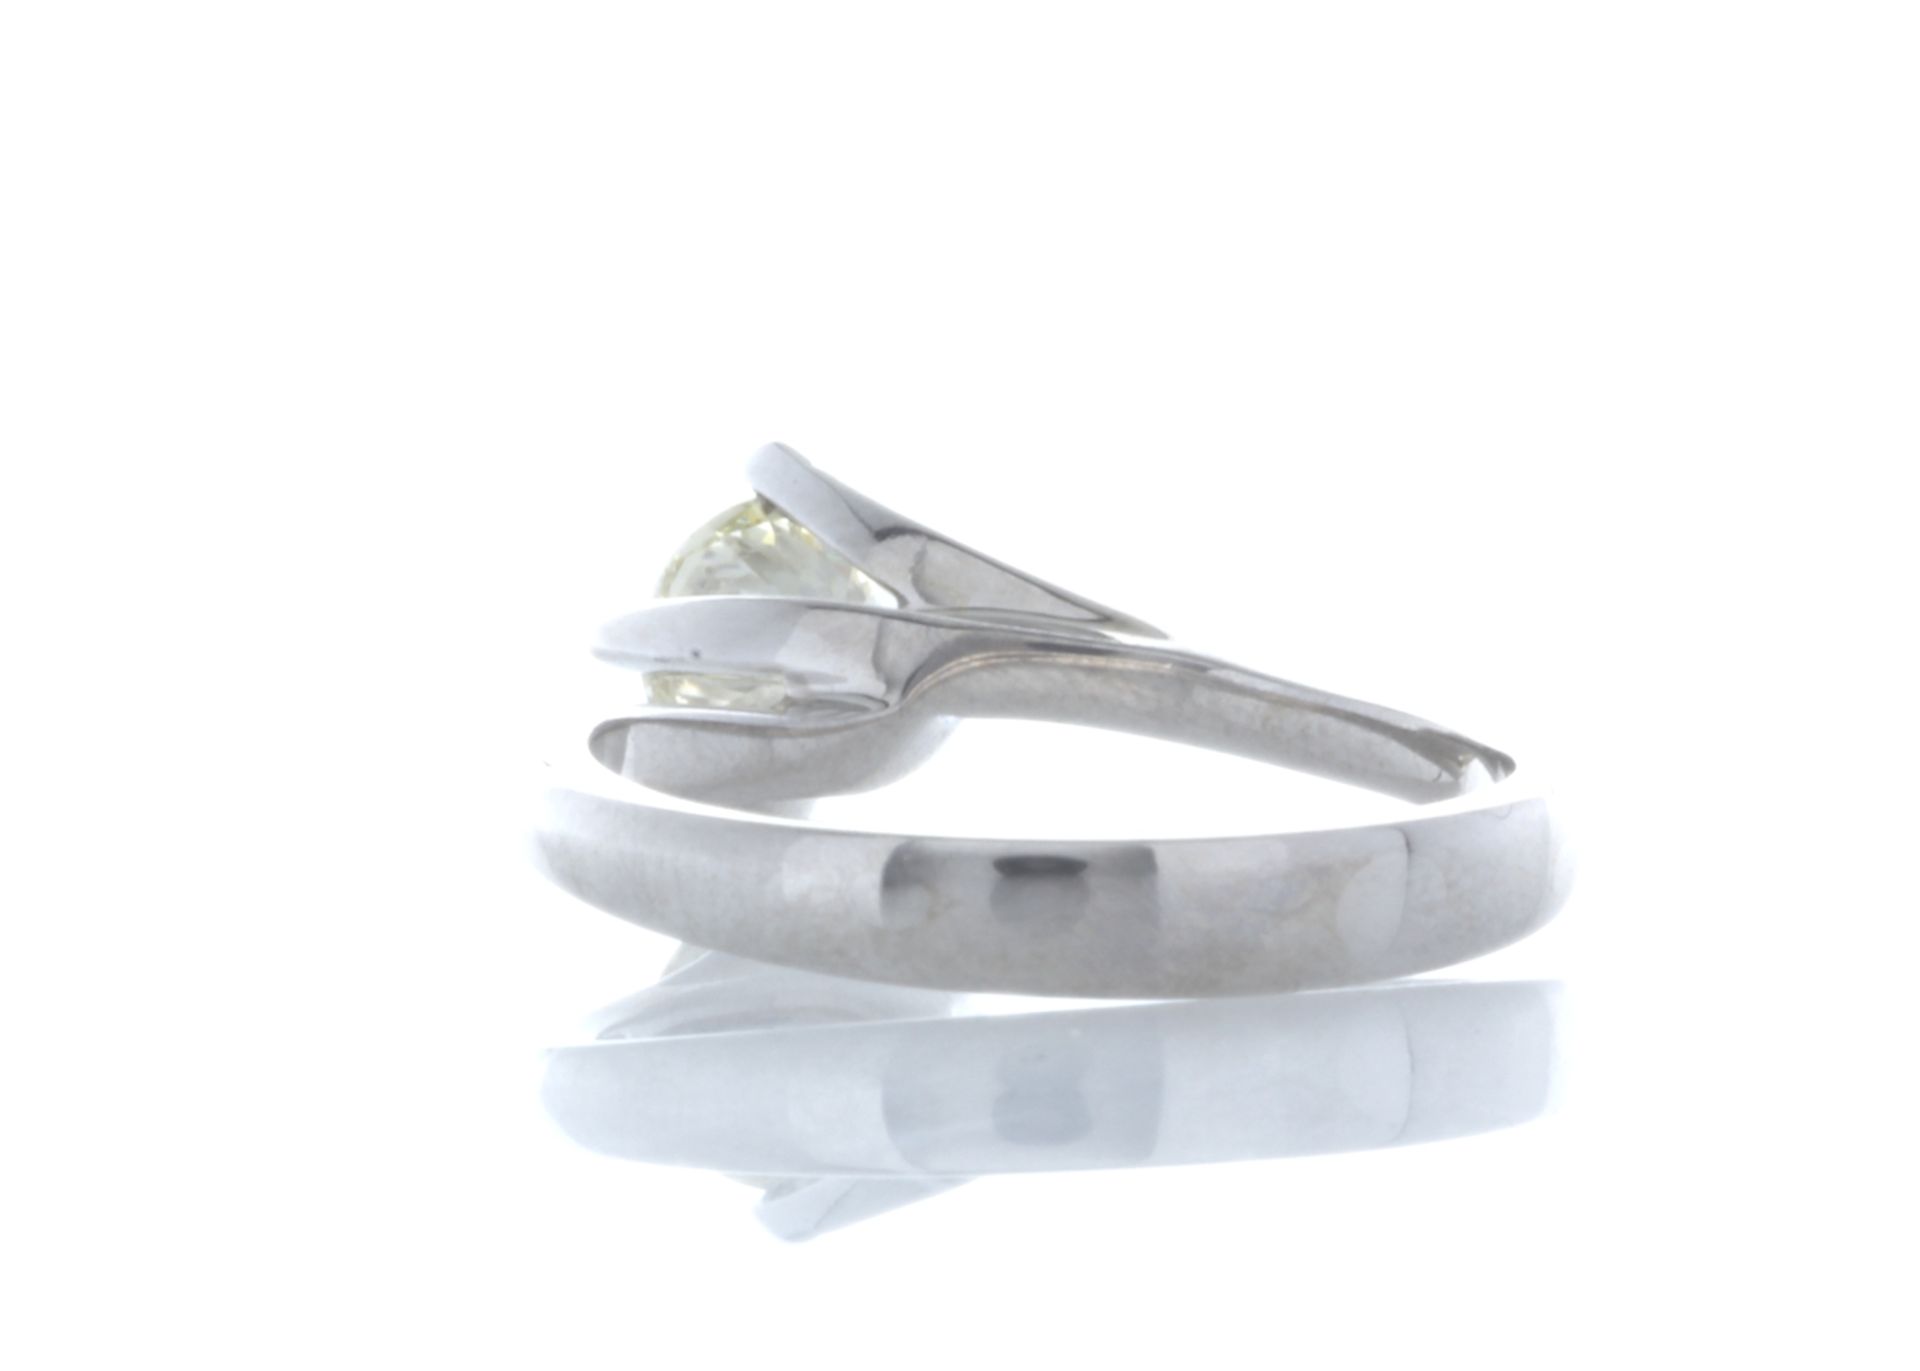 18ct White Gold Single Stone Fancy Claw Set Diamond Ring 0.71 Carats - Valued By IDI £12,875.00 - - Image 3 of 5